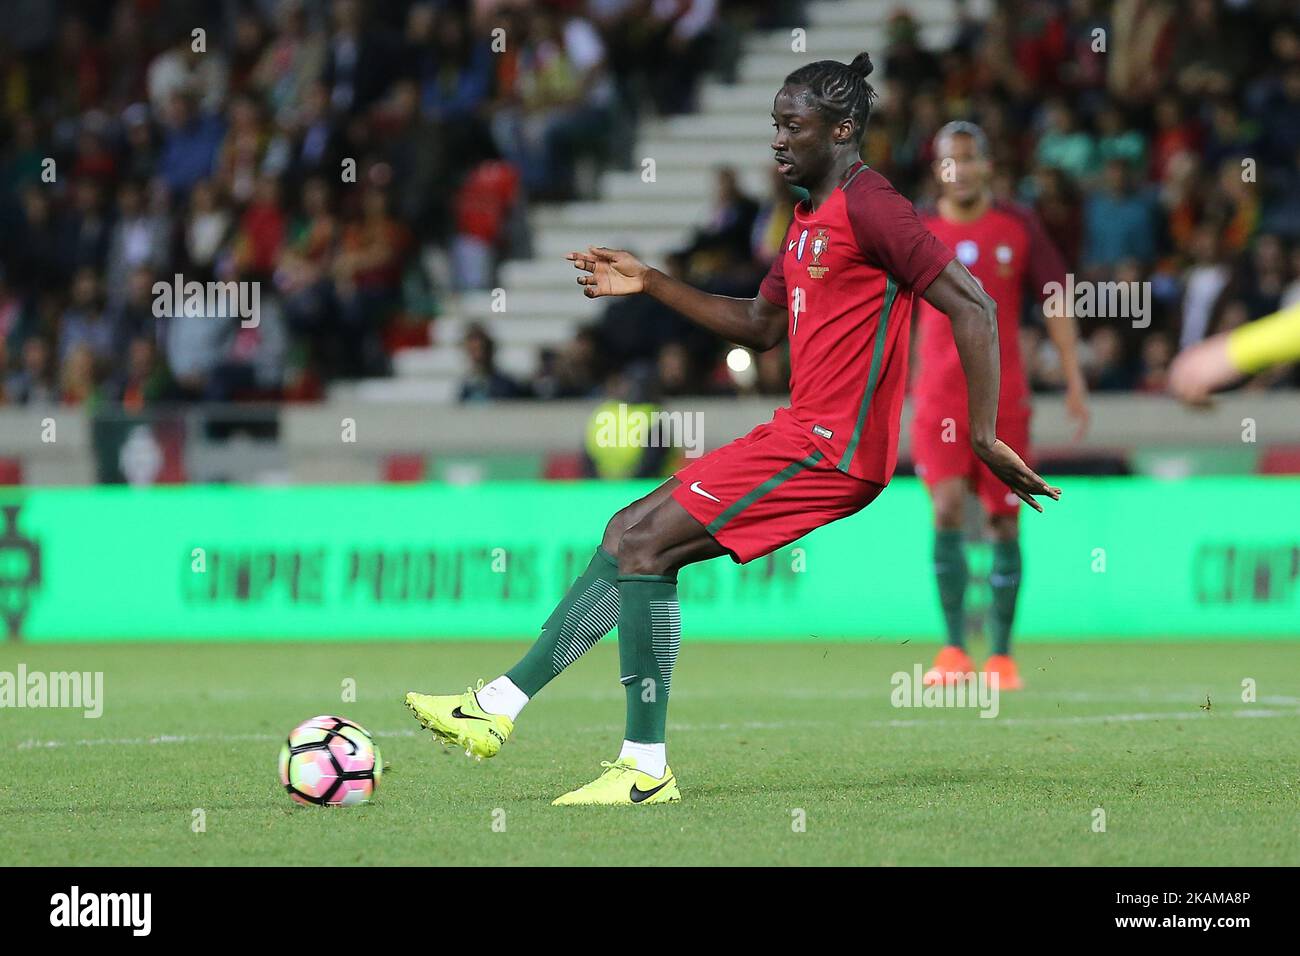 Portugals forward Eder during the FIFA 2018 World Cup friendly match between Portugal v Sweden at Estadio dos Barreiros on March 28, 2017 in Funchal, Madeira, Portugal. (Photo by Bruno Barros / DPI / NurPhoto ) *** Please Use Credit from Credit Field *** Stock Photo